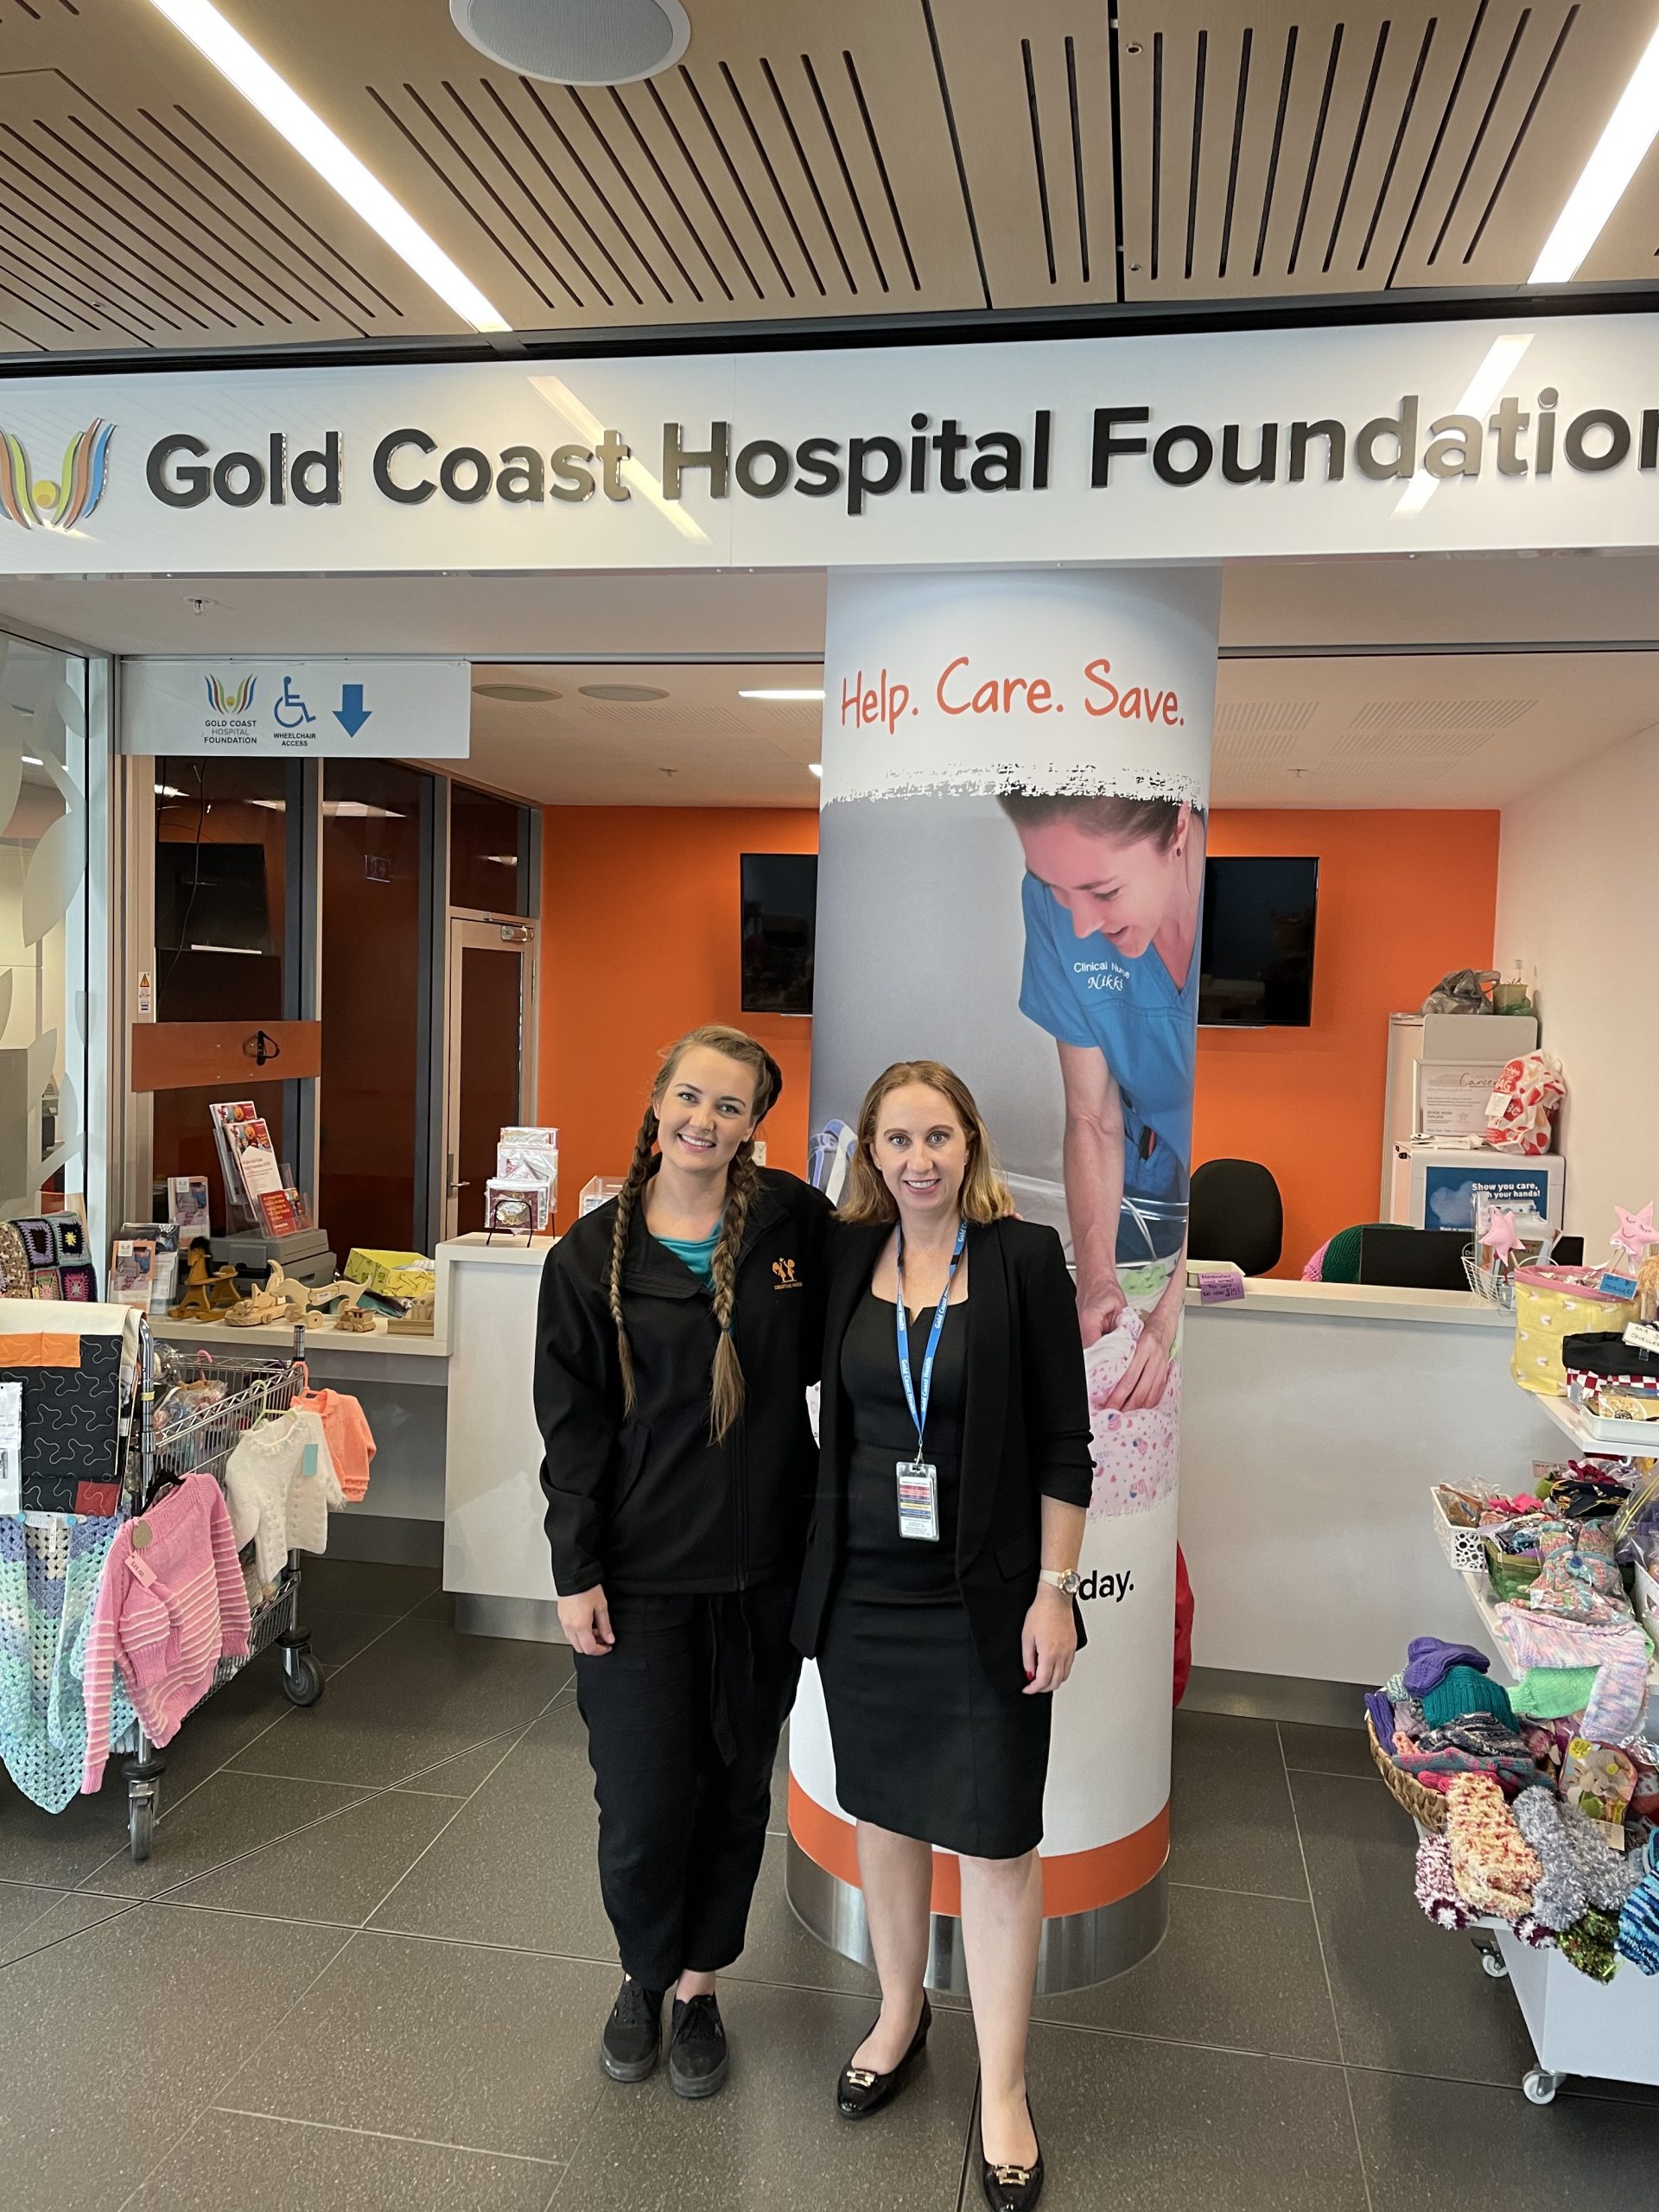 We have been busy organising some fundraising events to support the NICU & Special care unit at the Gold Coast University Hospital.  This is a cause very dear to our hearts & personal to some of our staff & families. Miss Cassie & Tegan from the Gold Coast Hospital Foundation have some great plans in […]